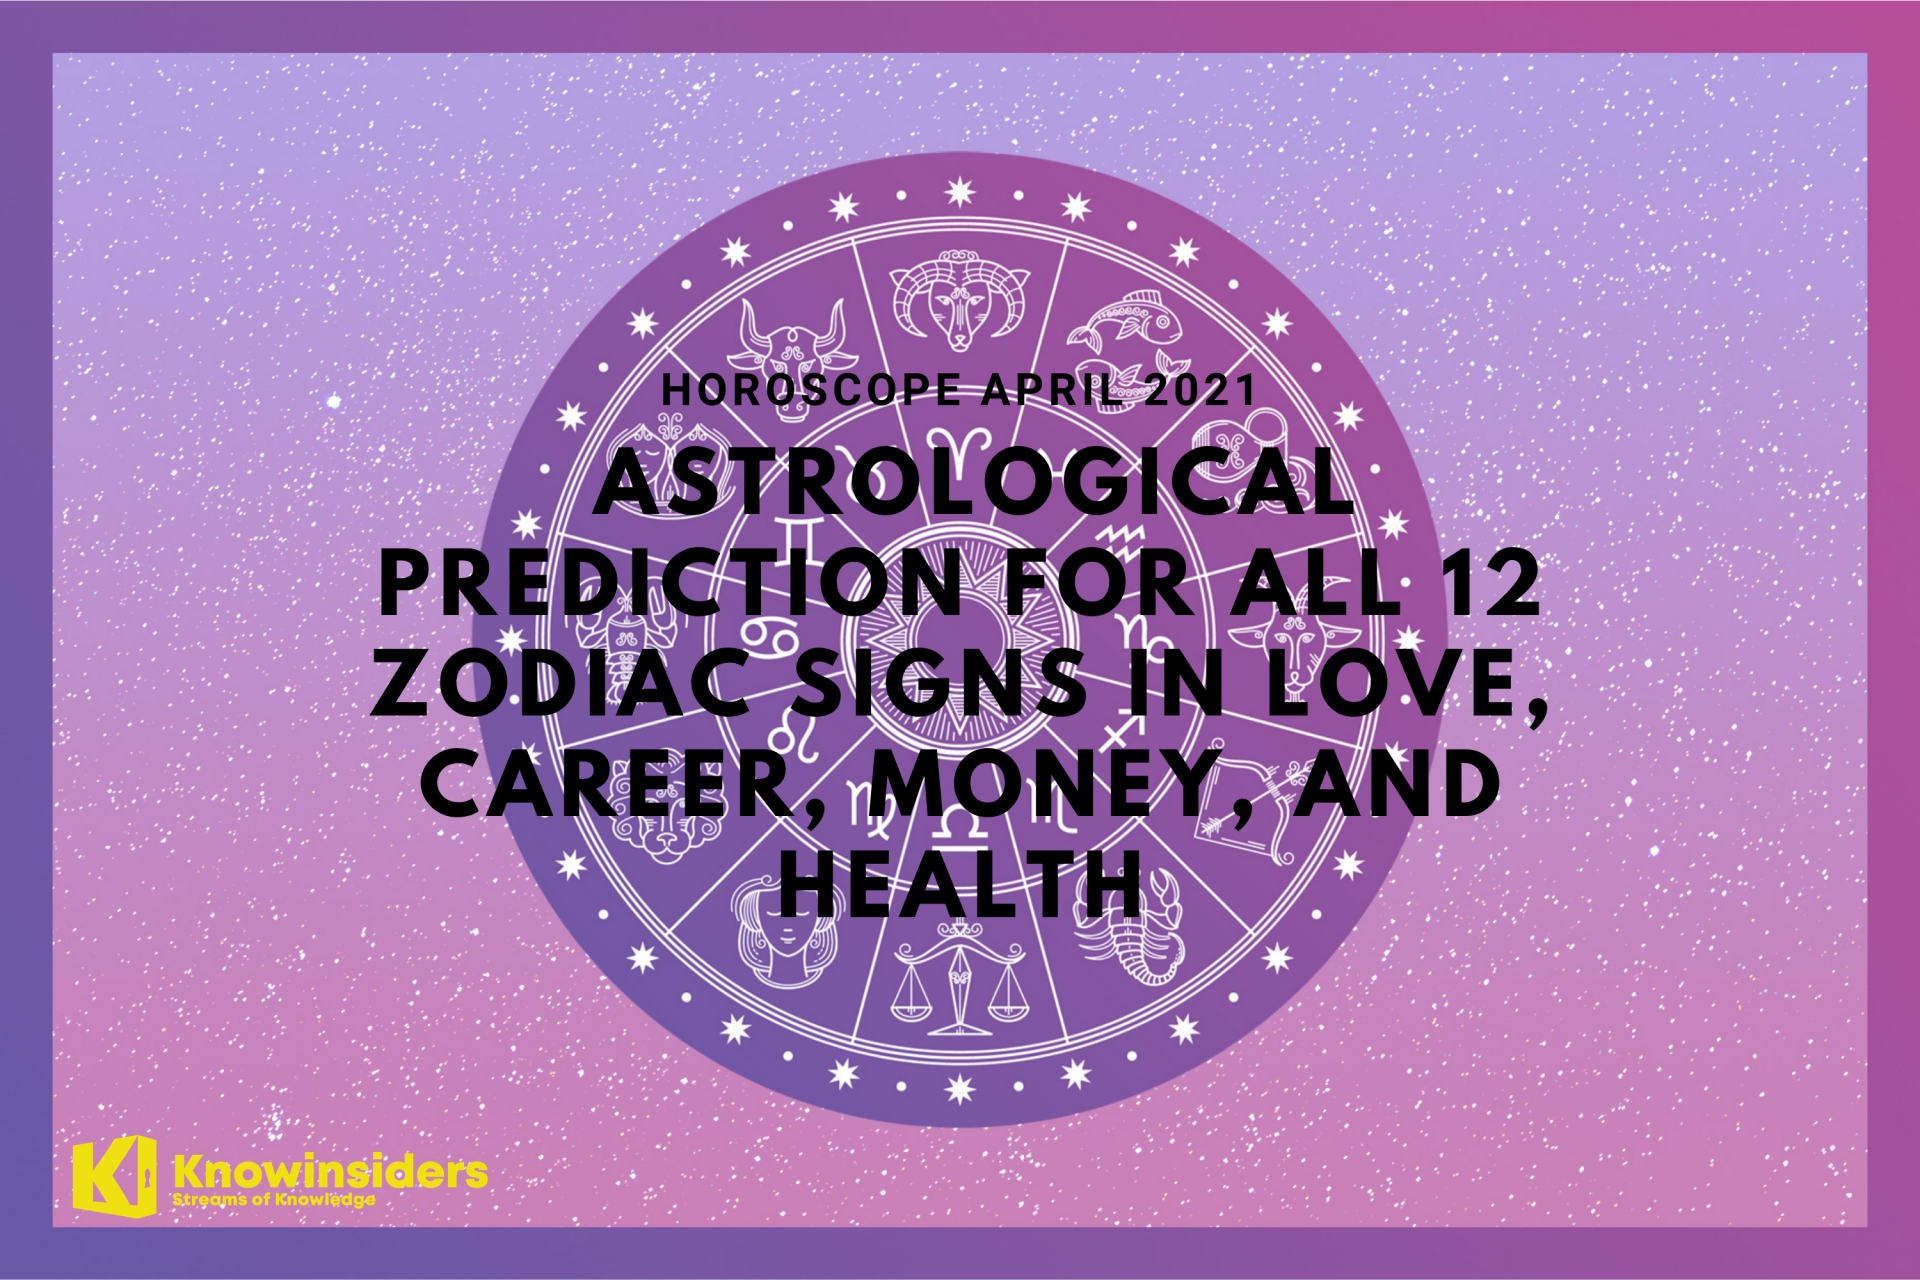 Horoscope MAY 2021: Astrological Prediction for all 12 Zodiac Signs in Love, Career, Money, and Health